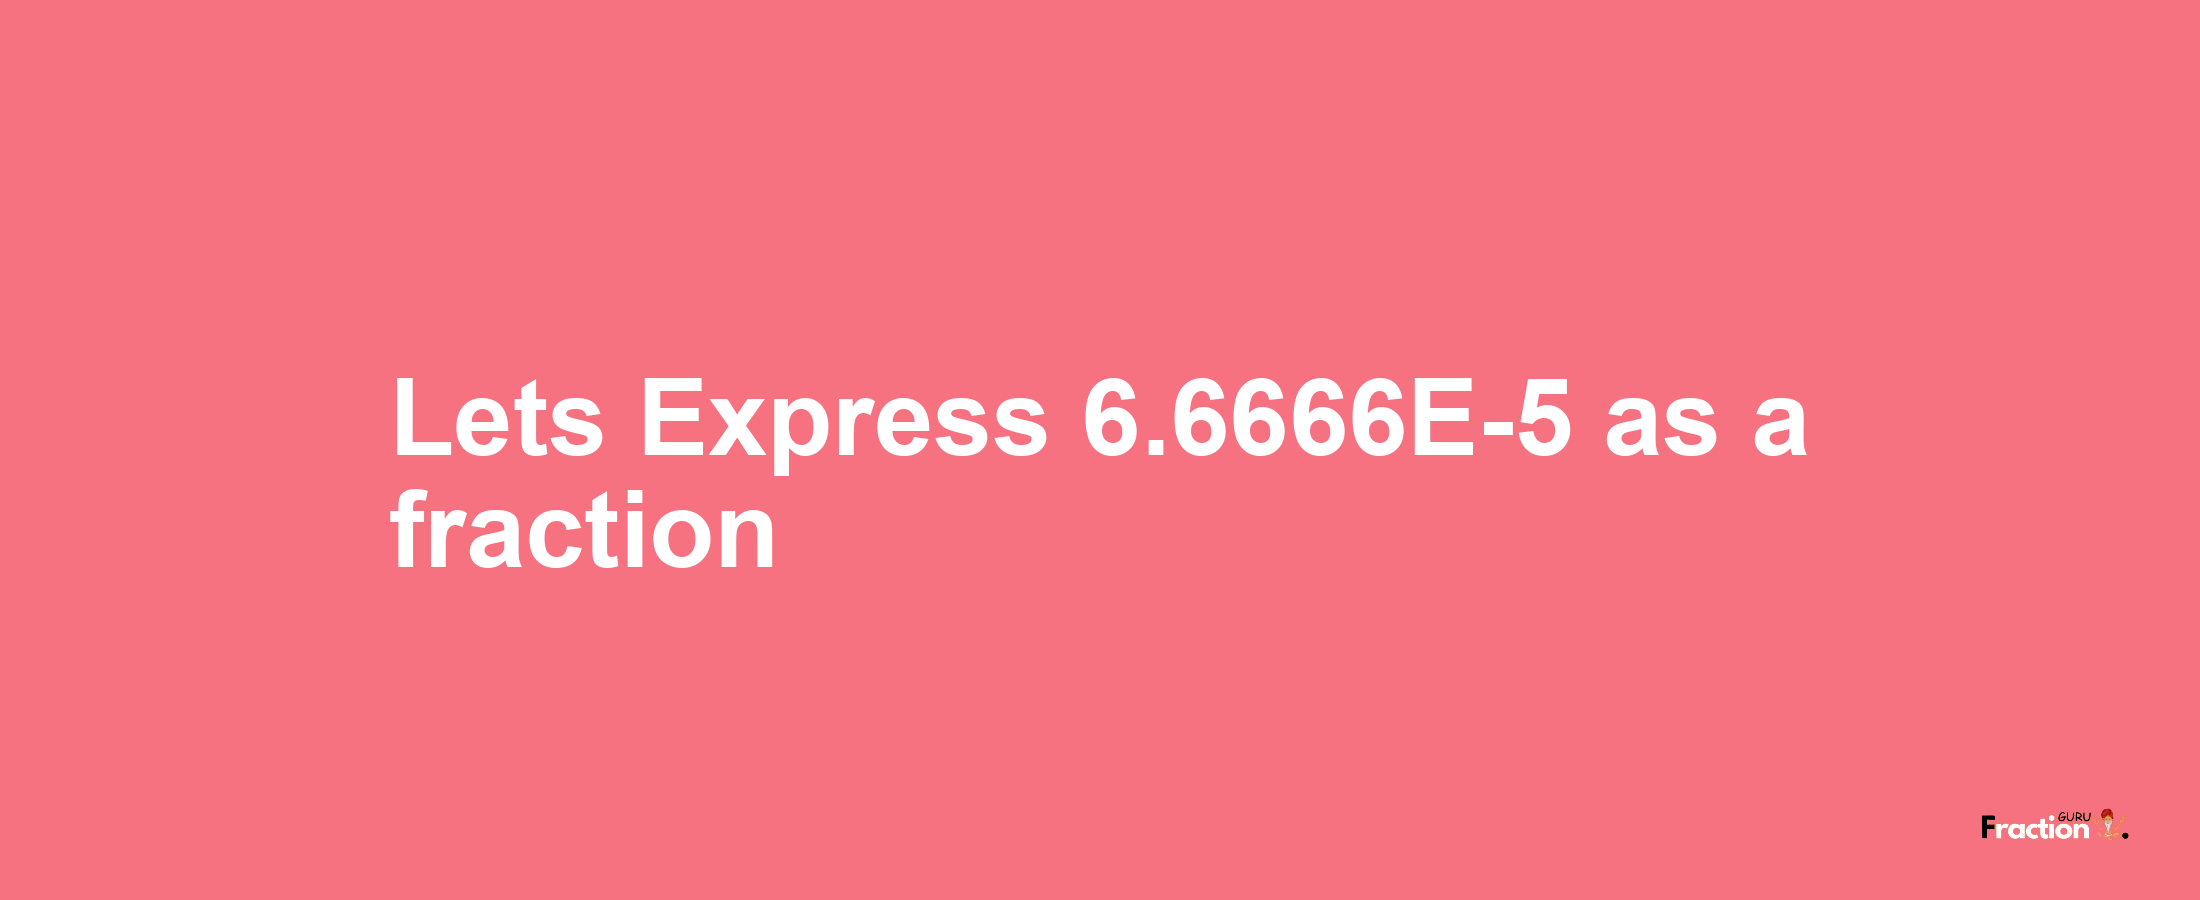 Lets Express 6.6666E-5 as afraction